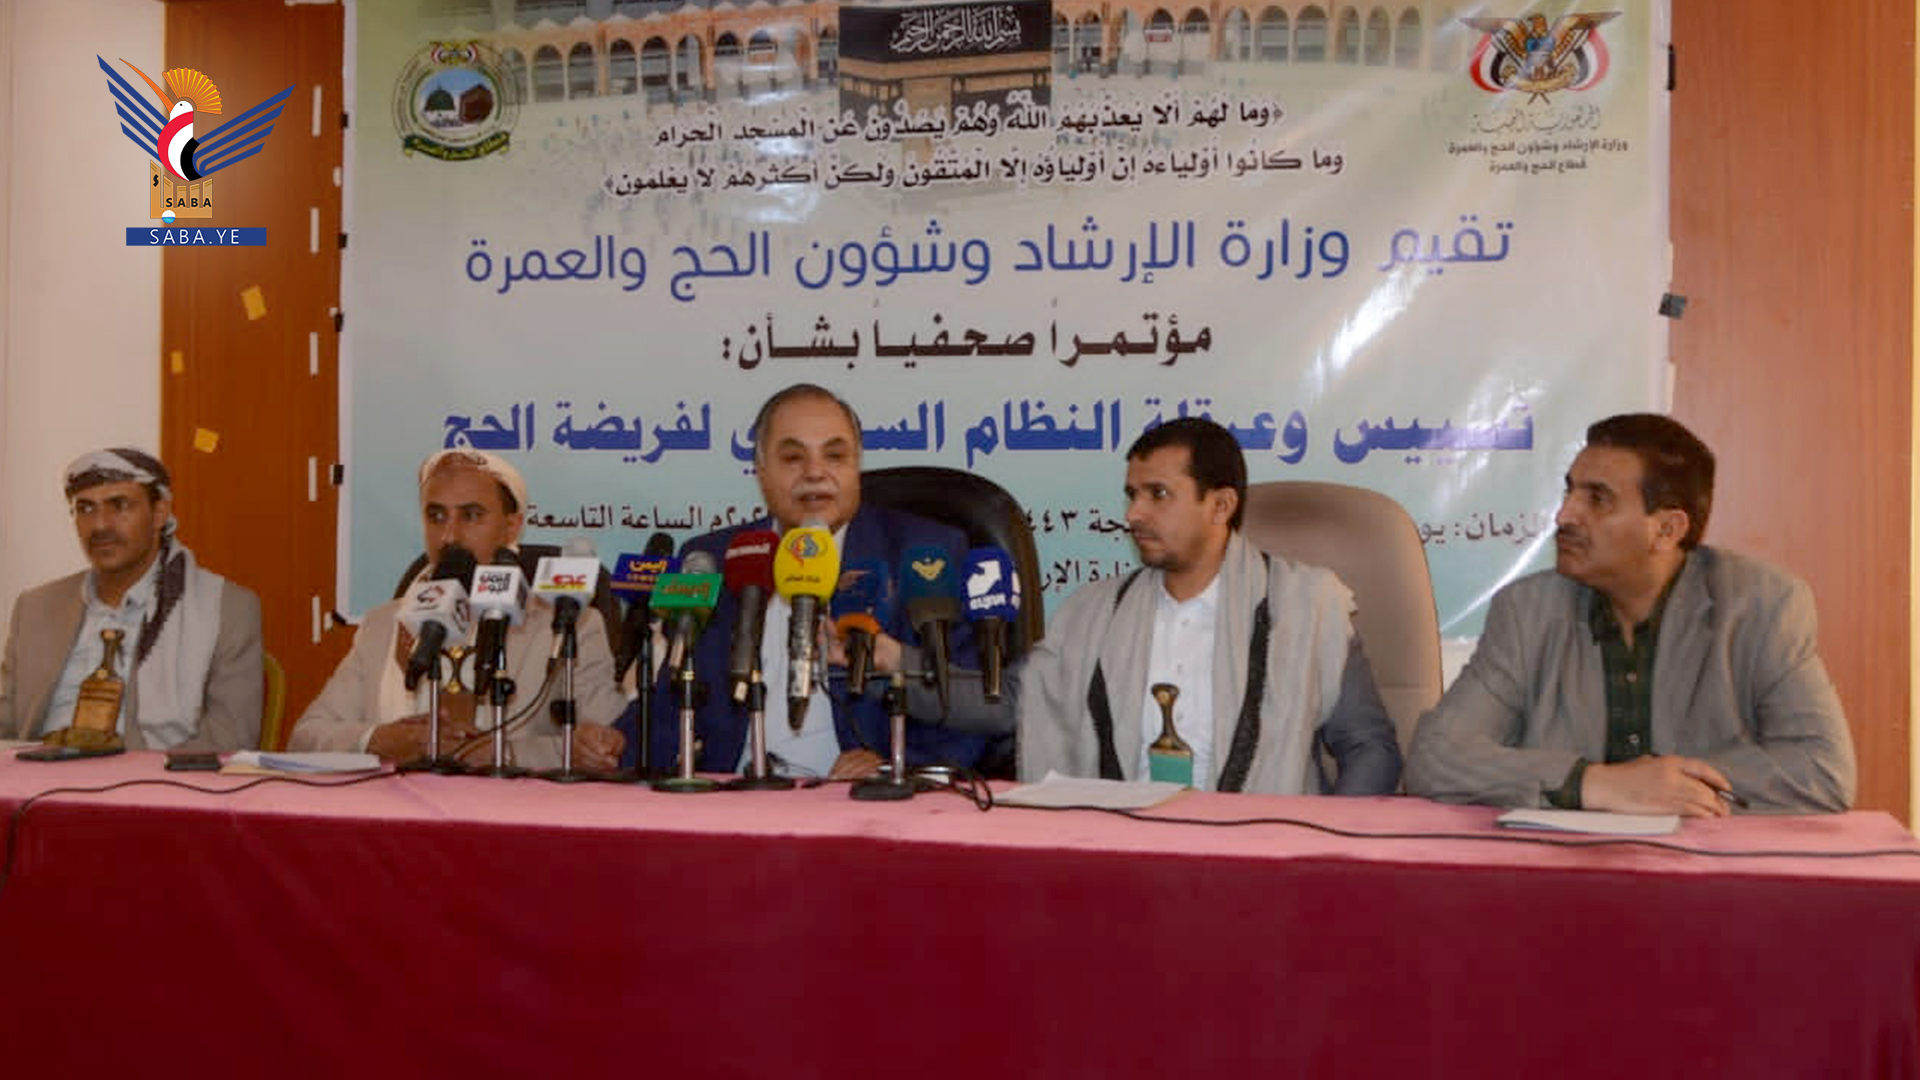 Ministry of Guidance organizes press conference on politicization, obstruction of Saudi regime for Hajj